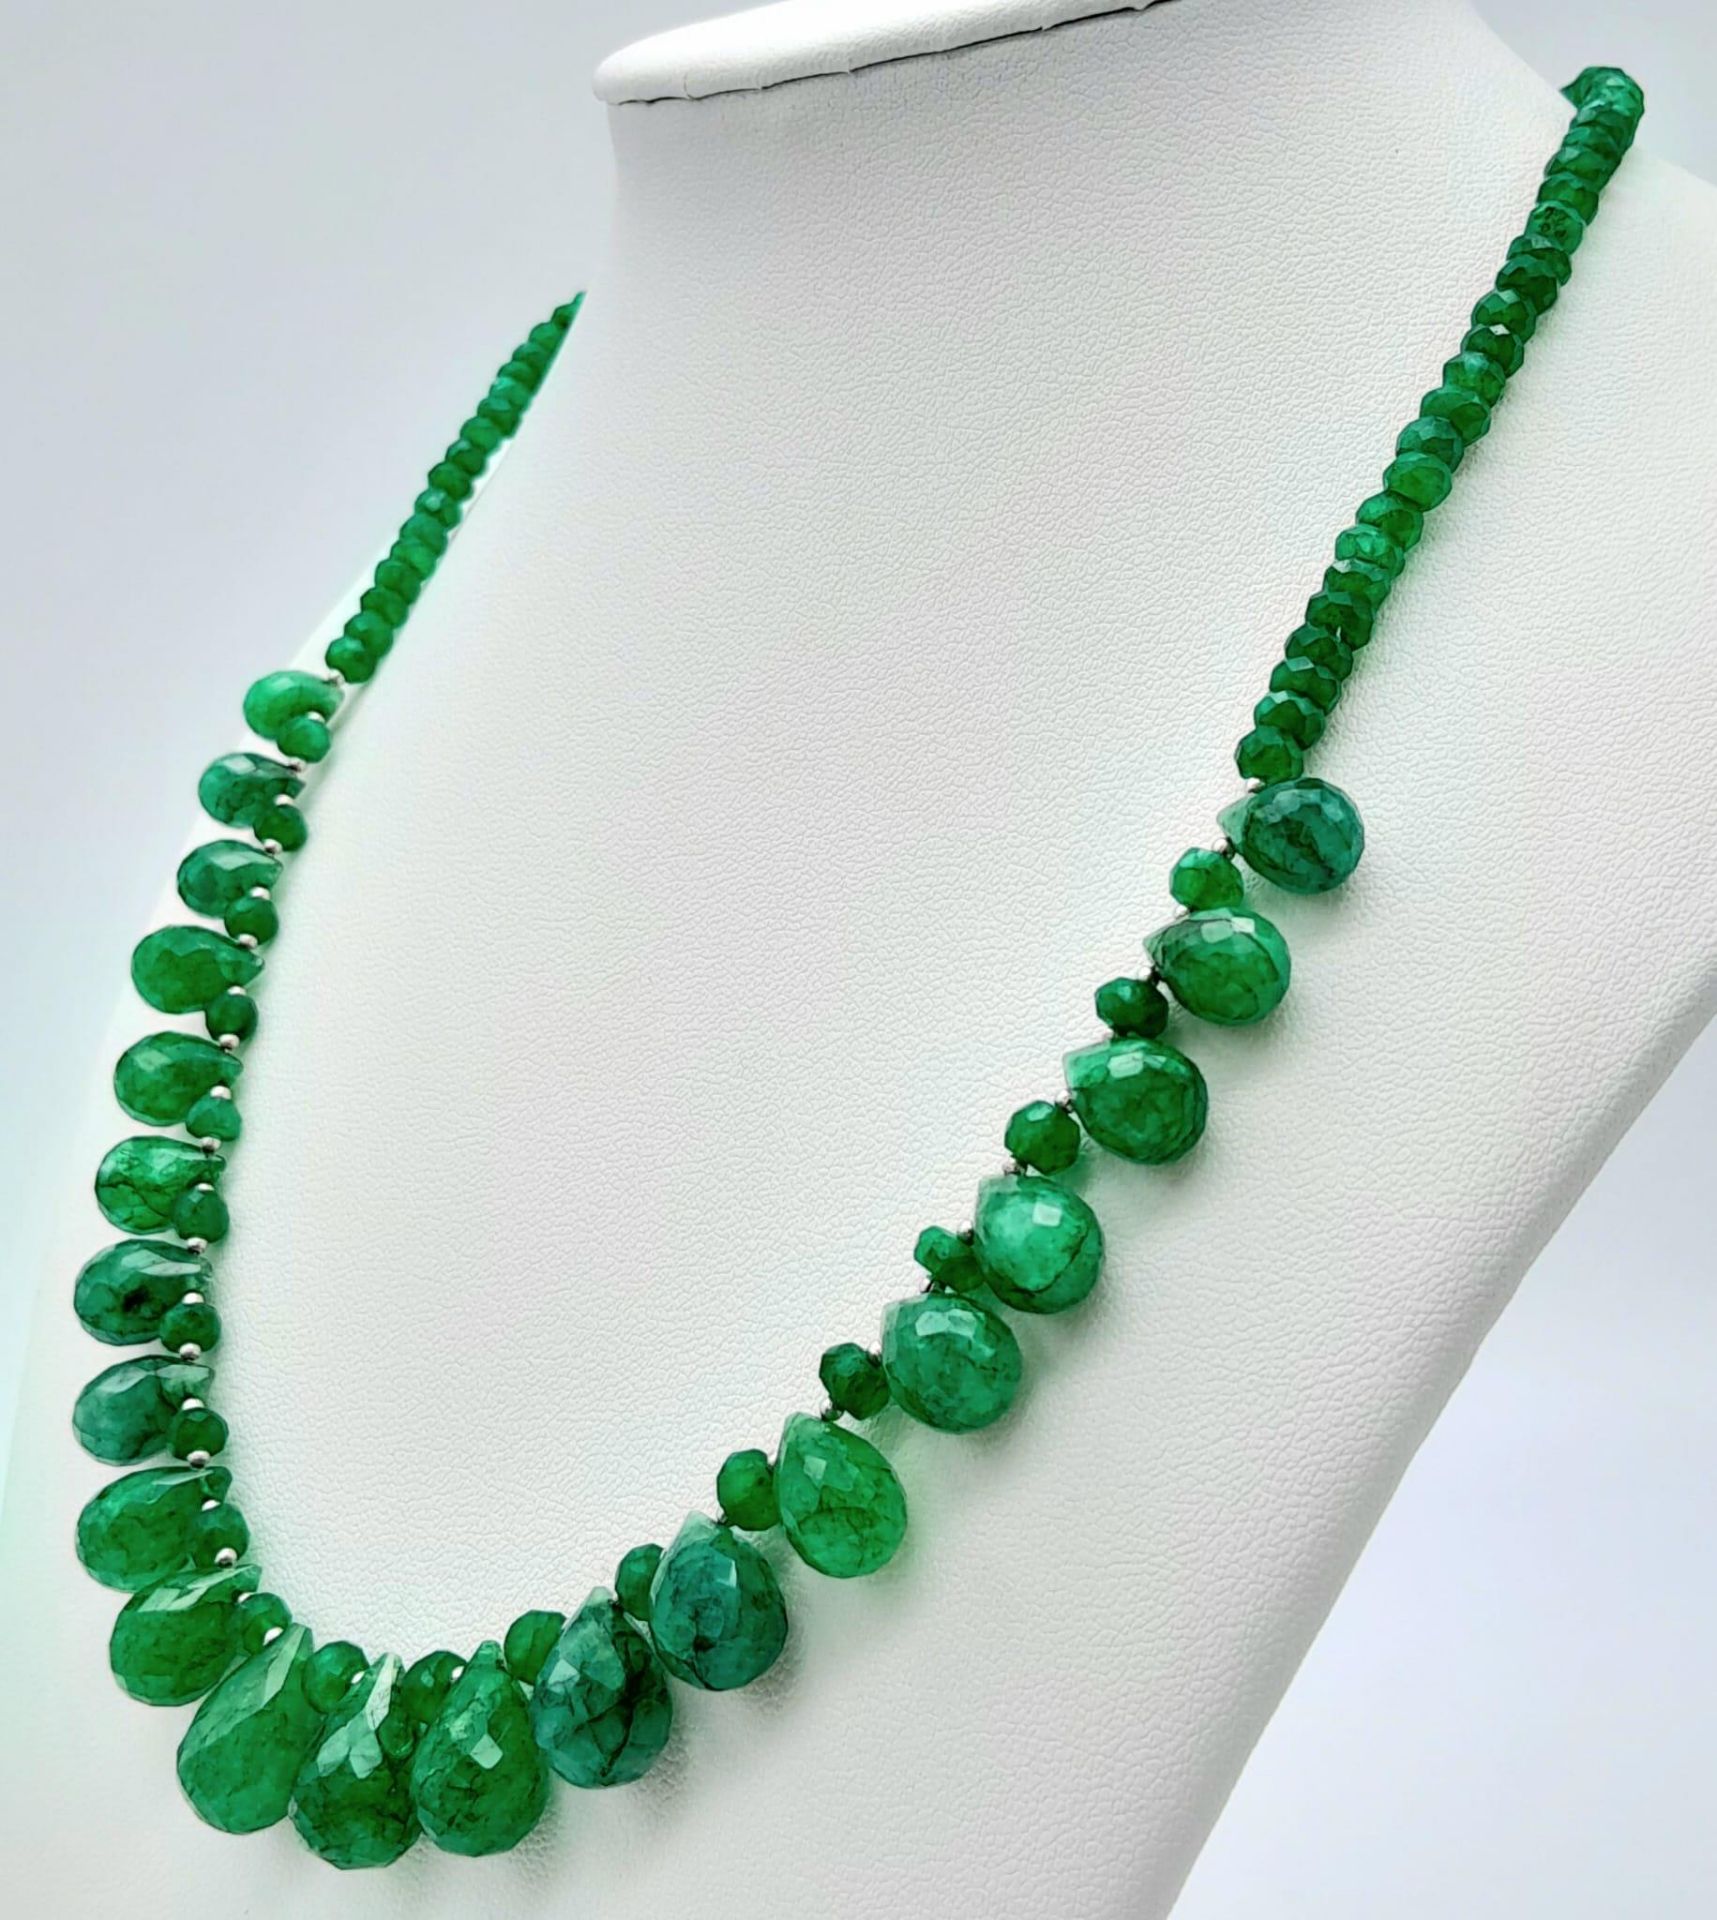 An Emerald Beaded Necklace with Emerald Teardrops and 925 Silver Clasp. 165ctw emeralds, 45.5cm - Bild 2 aus 4